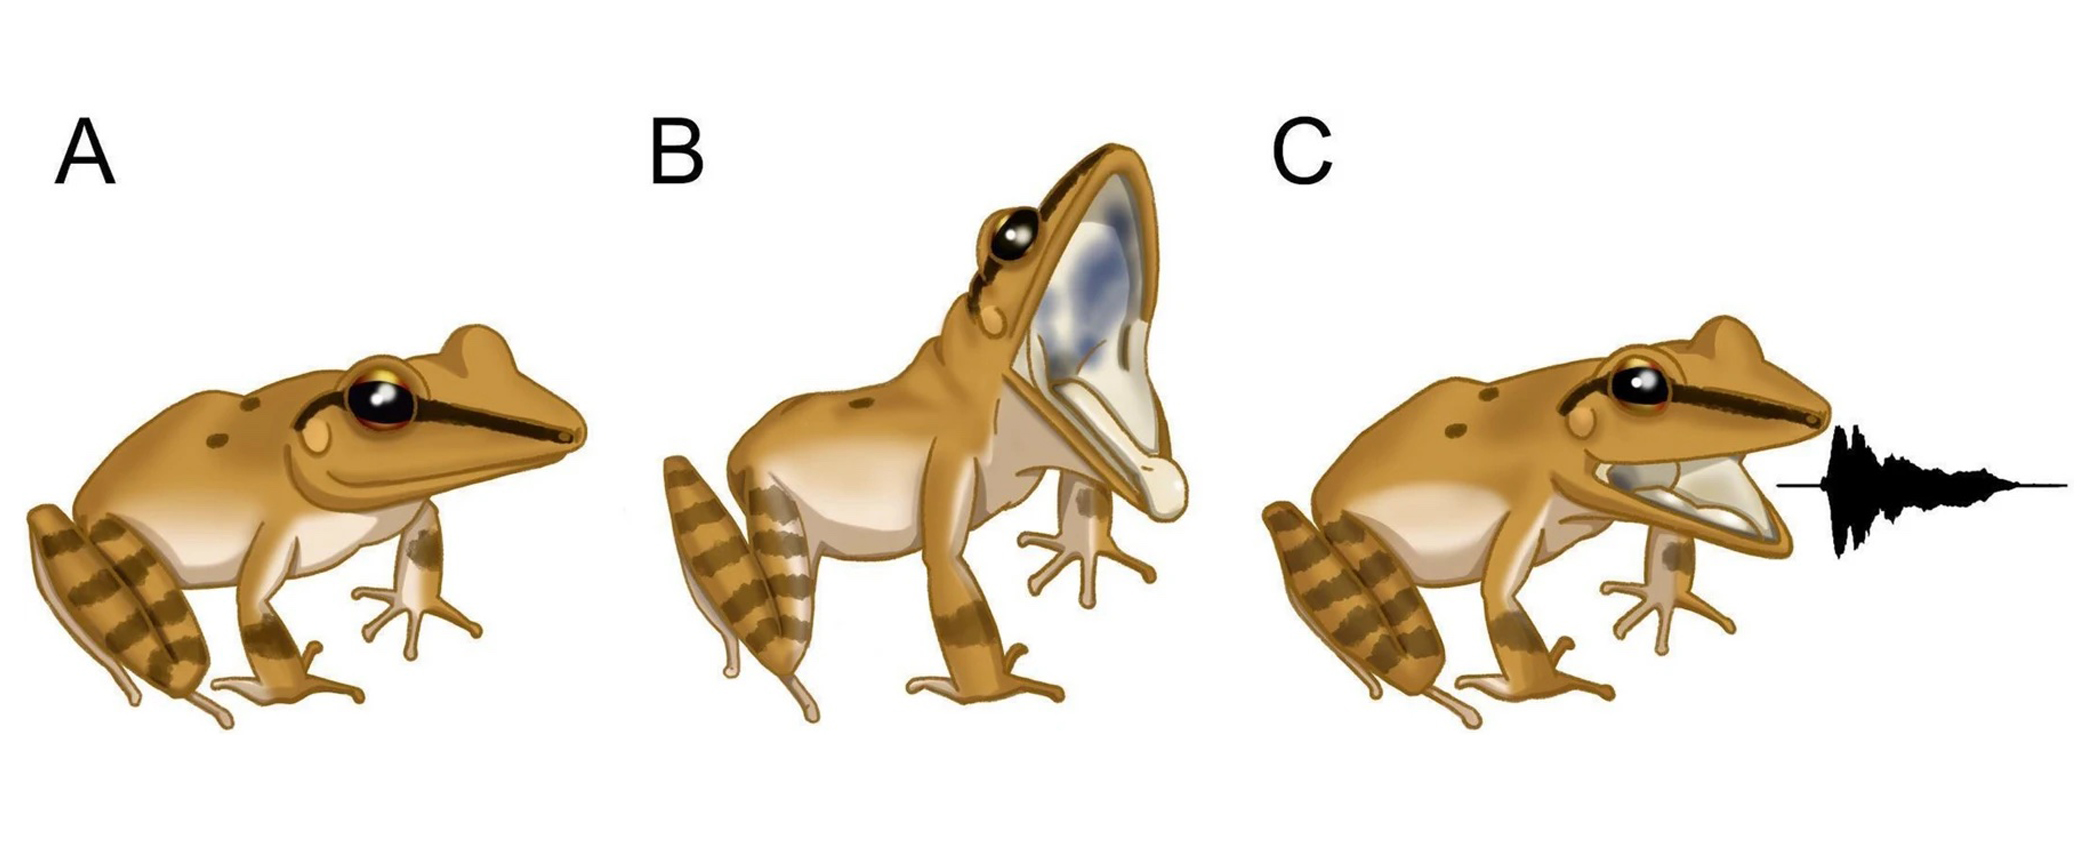 three illustrations of the leaf litter frog, side by side, showing them crouched, then opening their jaw wide, then closing their mouth and releasing the waveform.